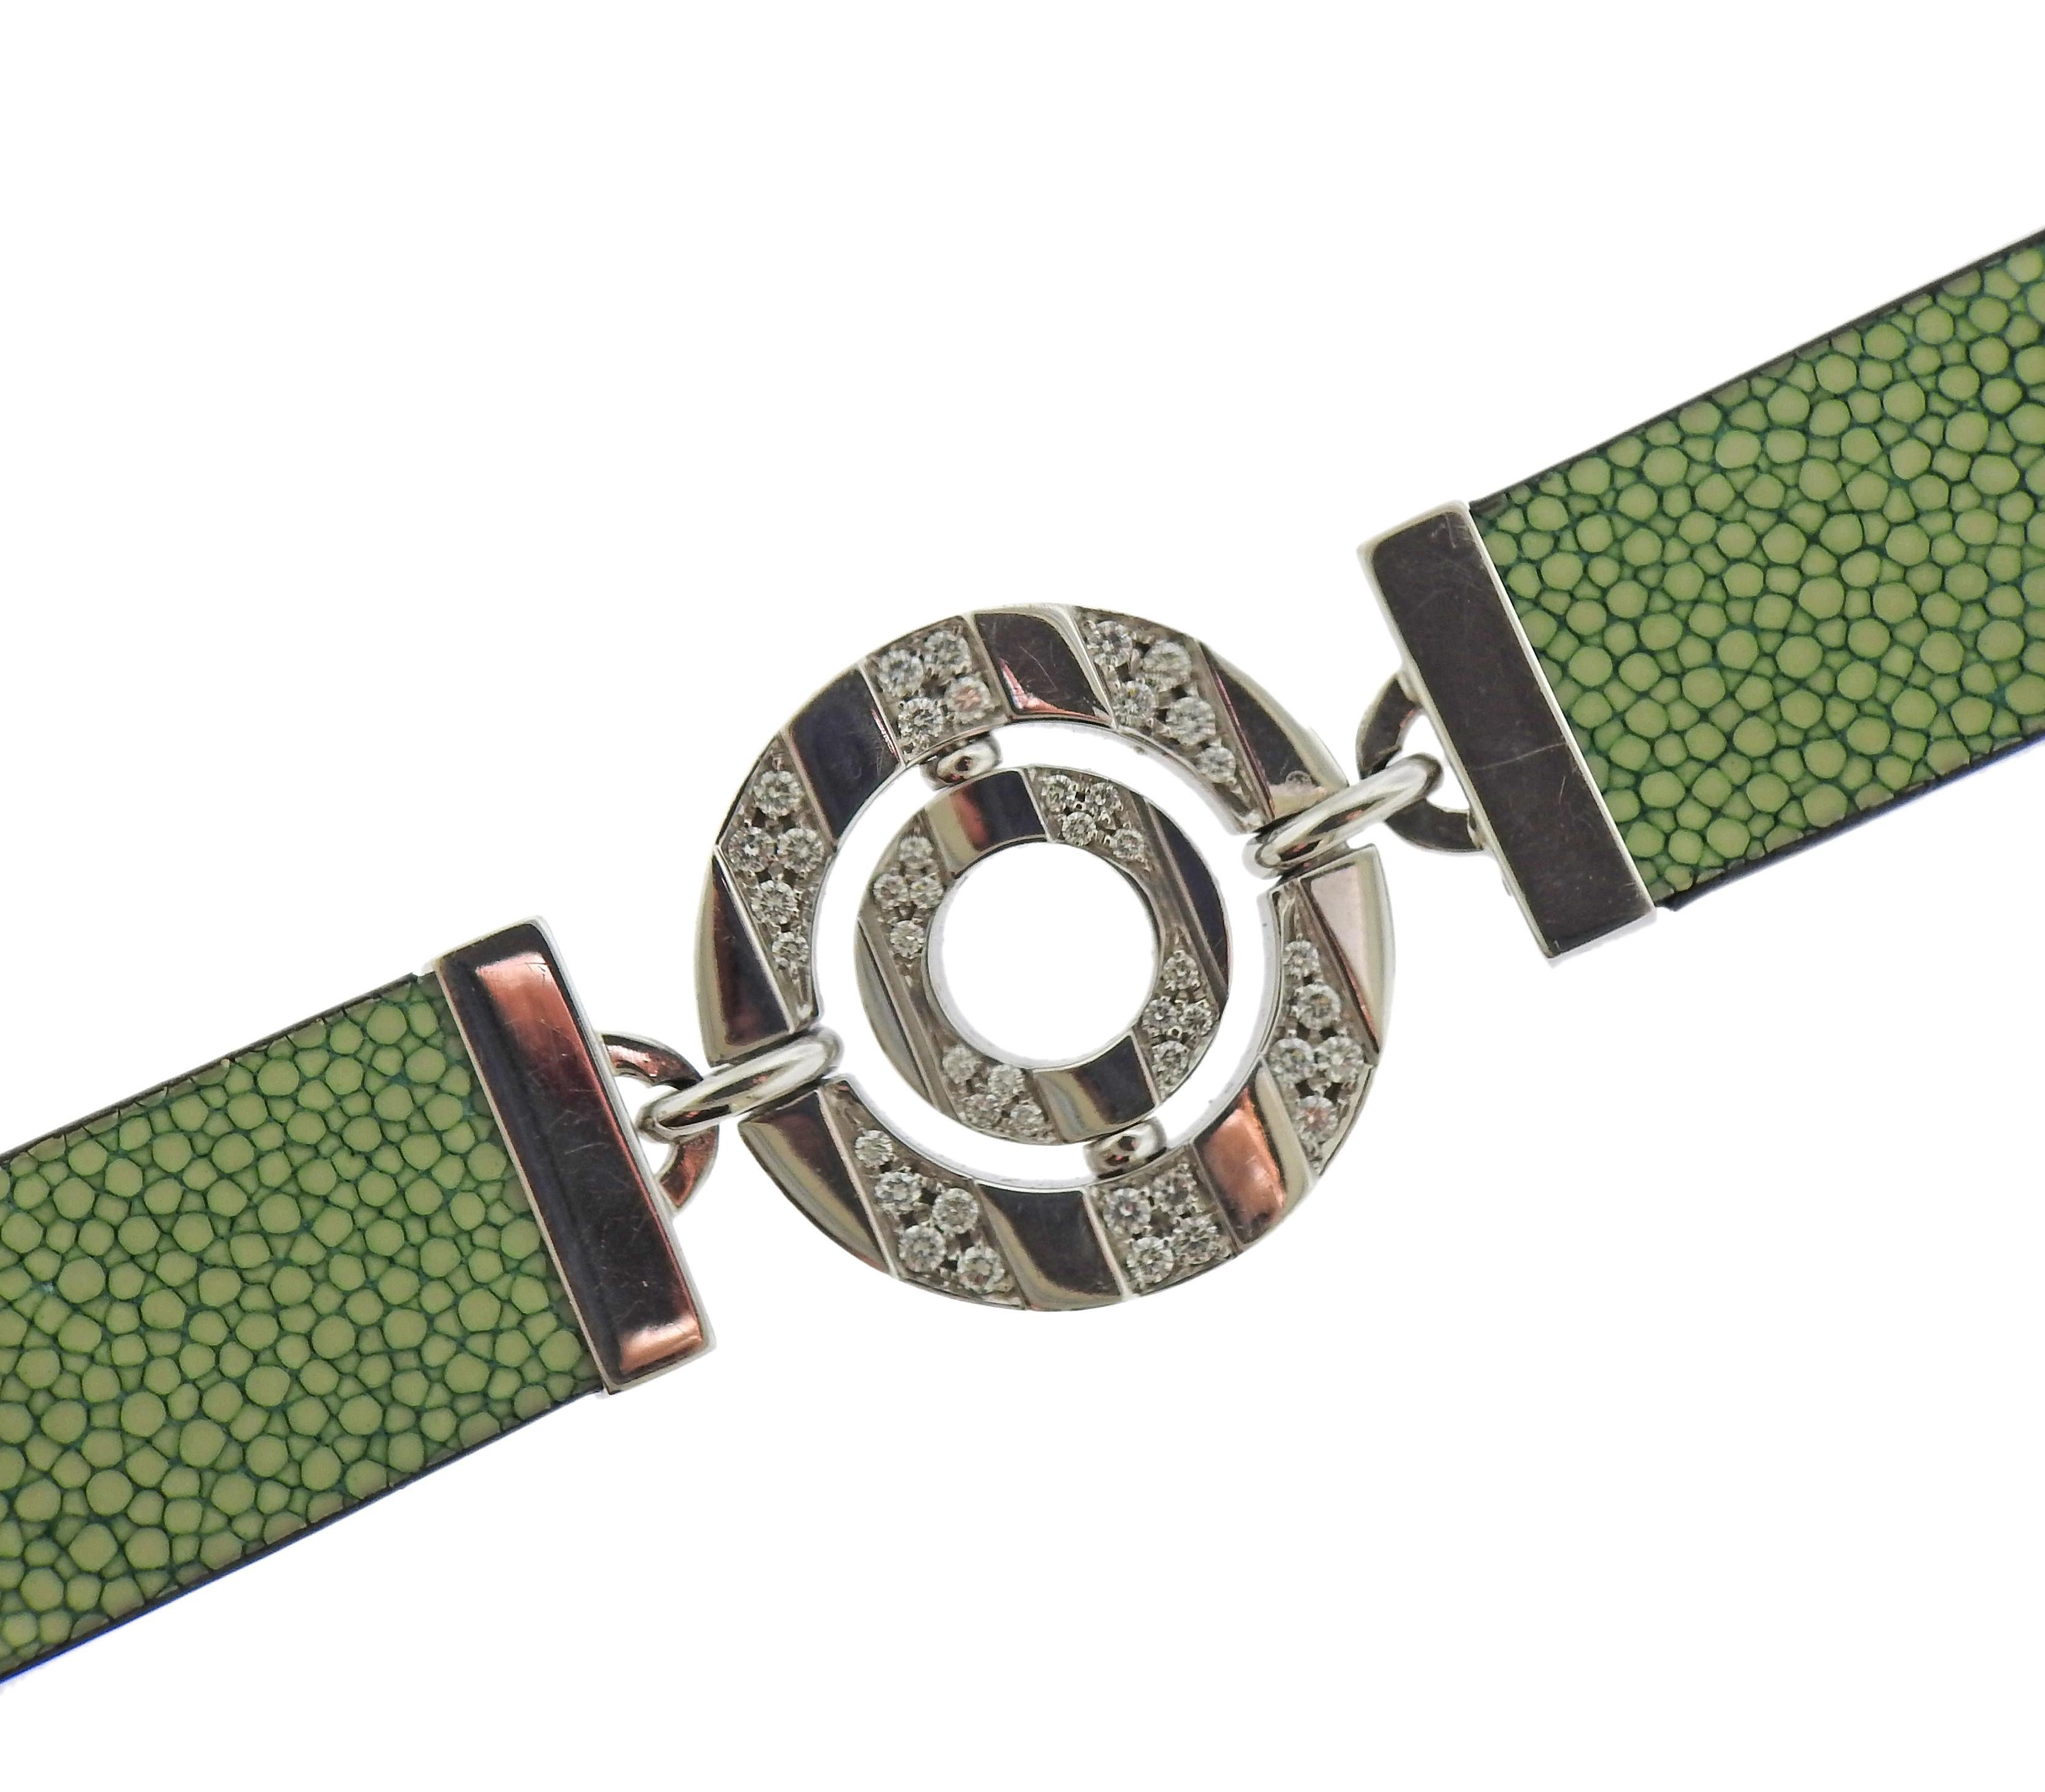 Iconic 18k white gold Bvlgari bracelet from Astrale collection, featuring approx. 0.74ctw in diamonds and green ostrich leather bracelet. Maximum length with the extender - 8